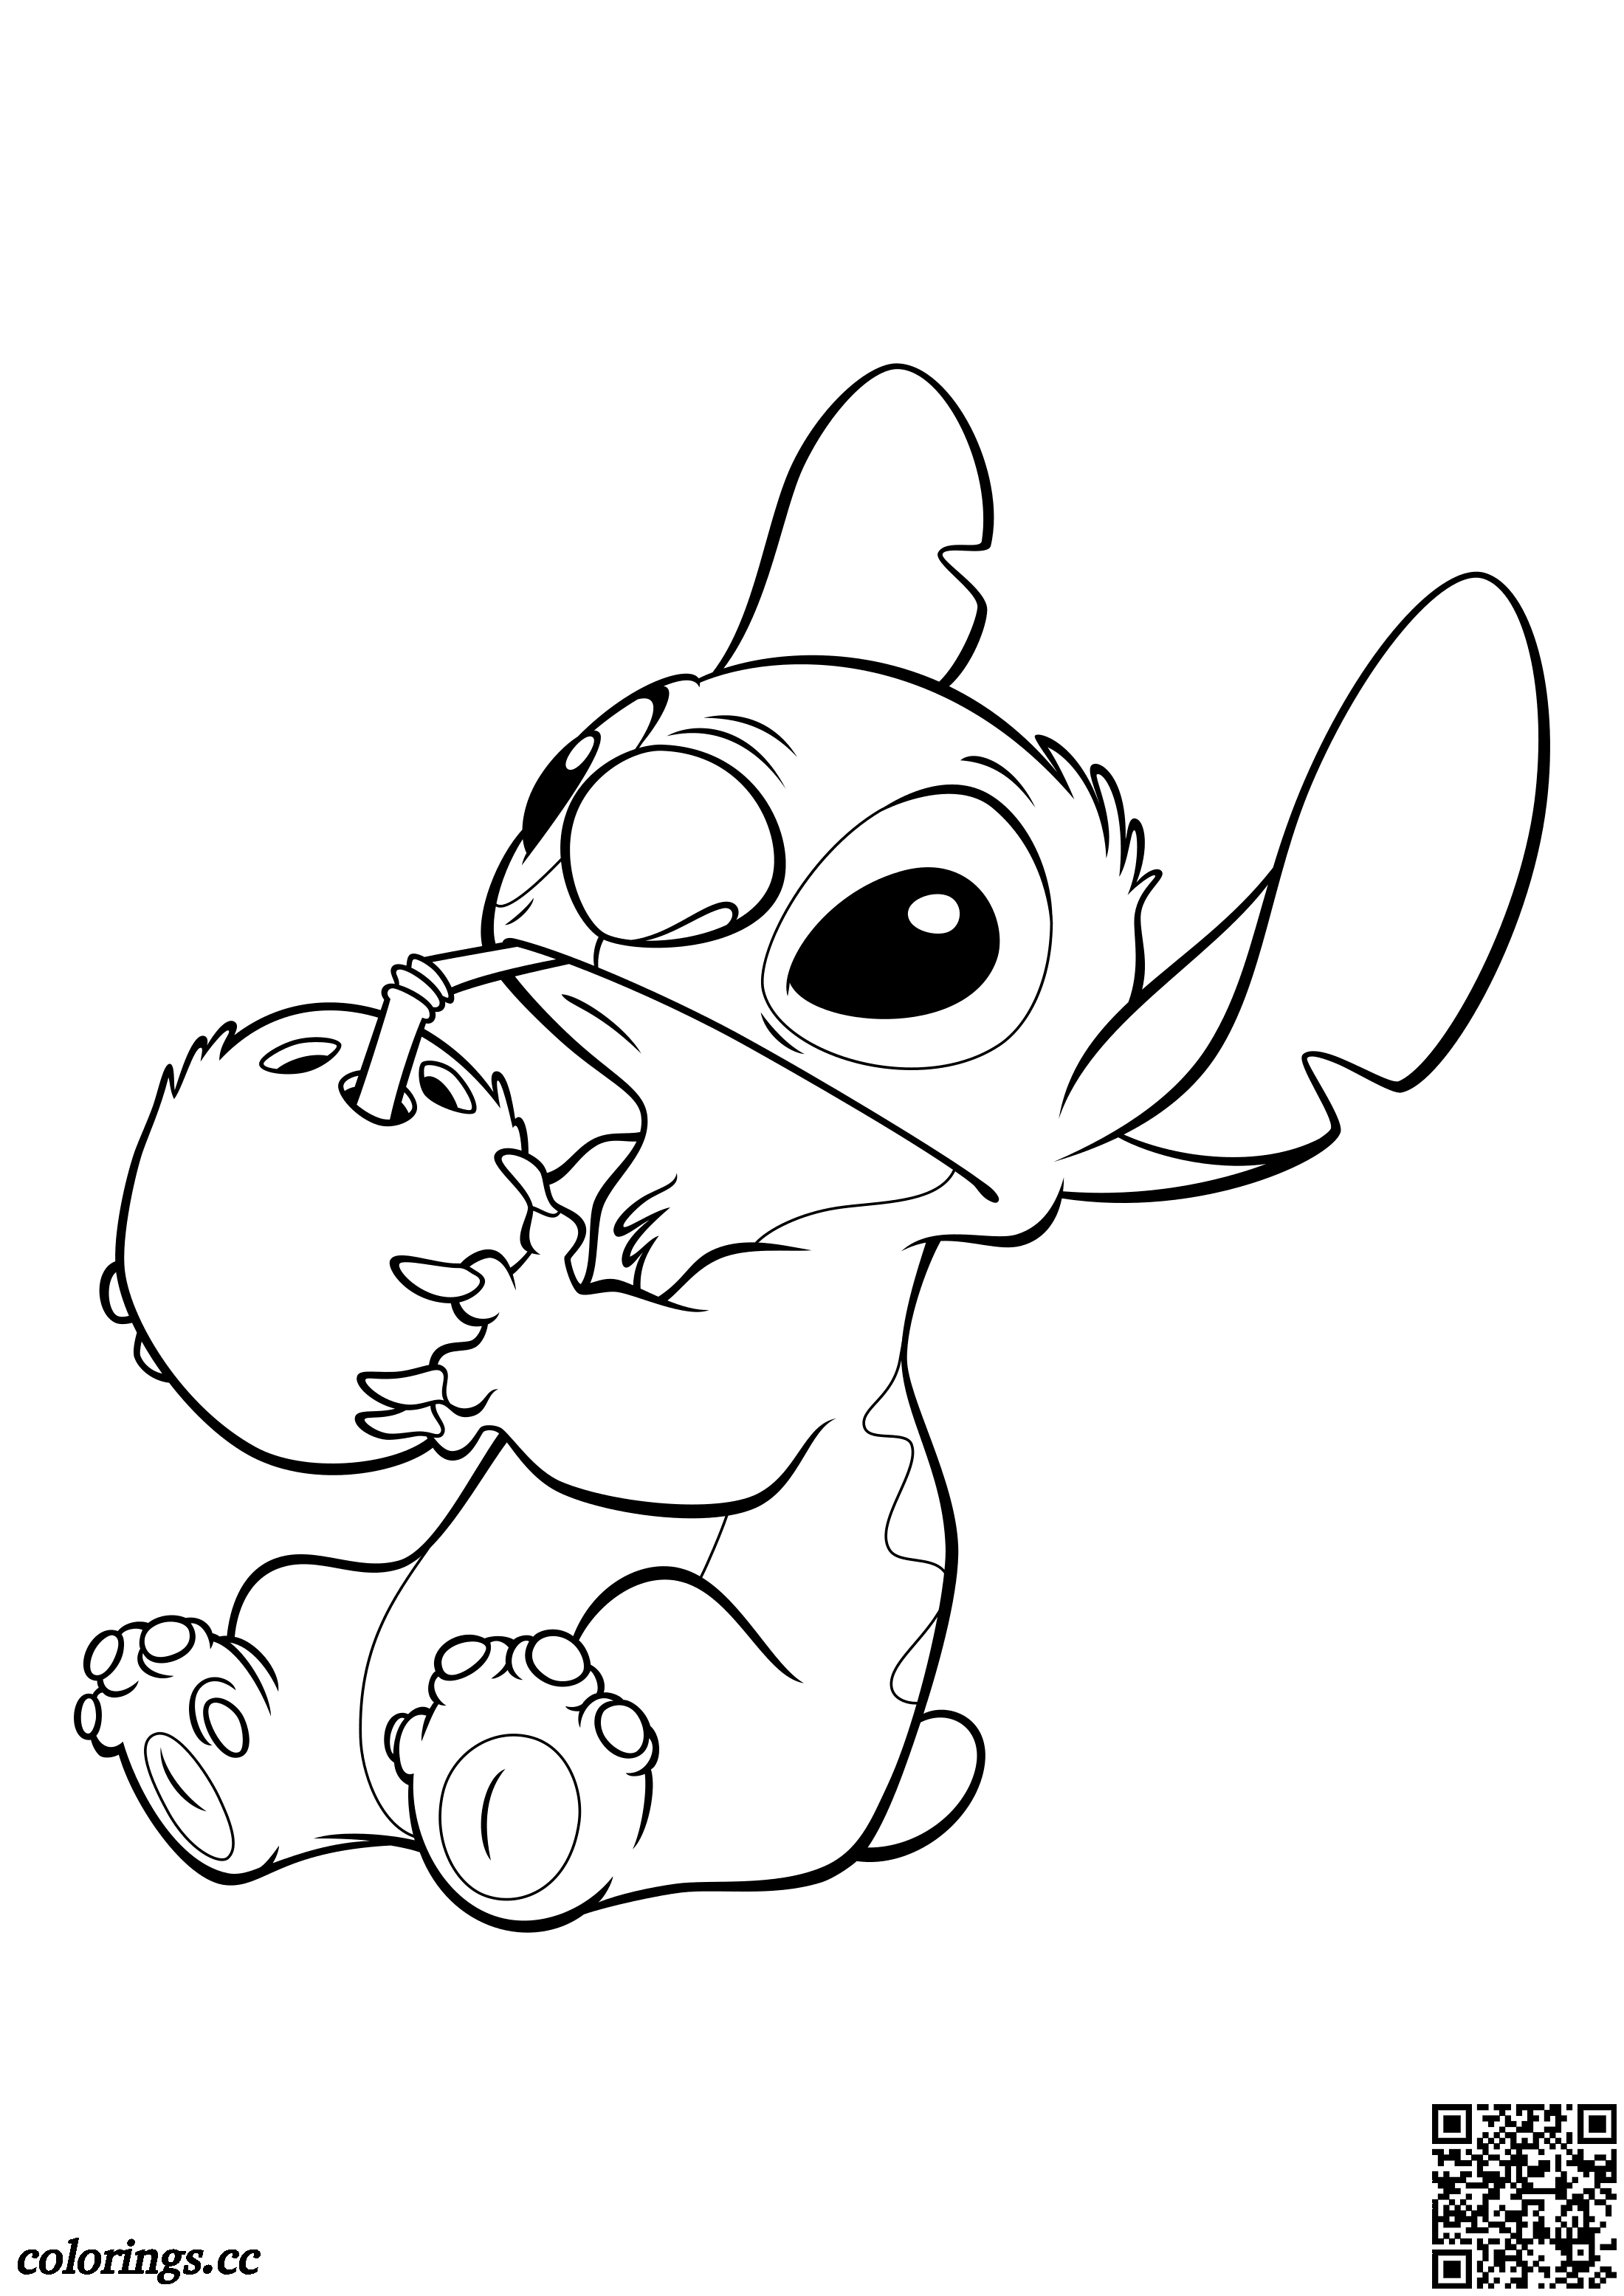 Lilo &amp; Stitch coloring pages, Lilo and Stitch coloring pages ...